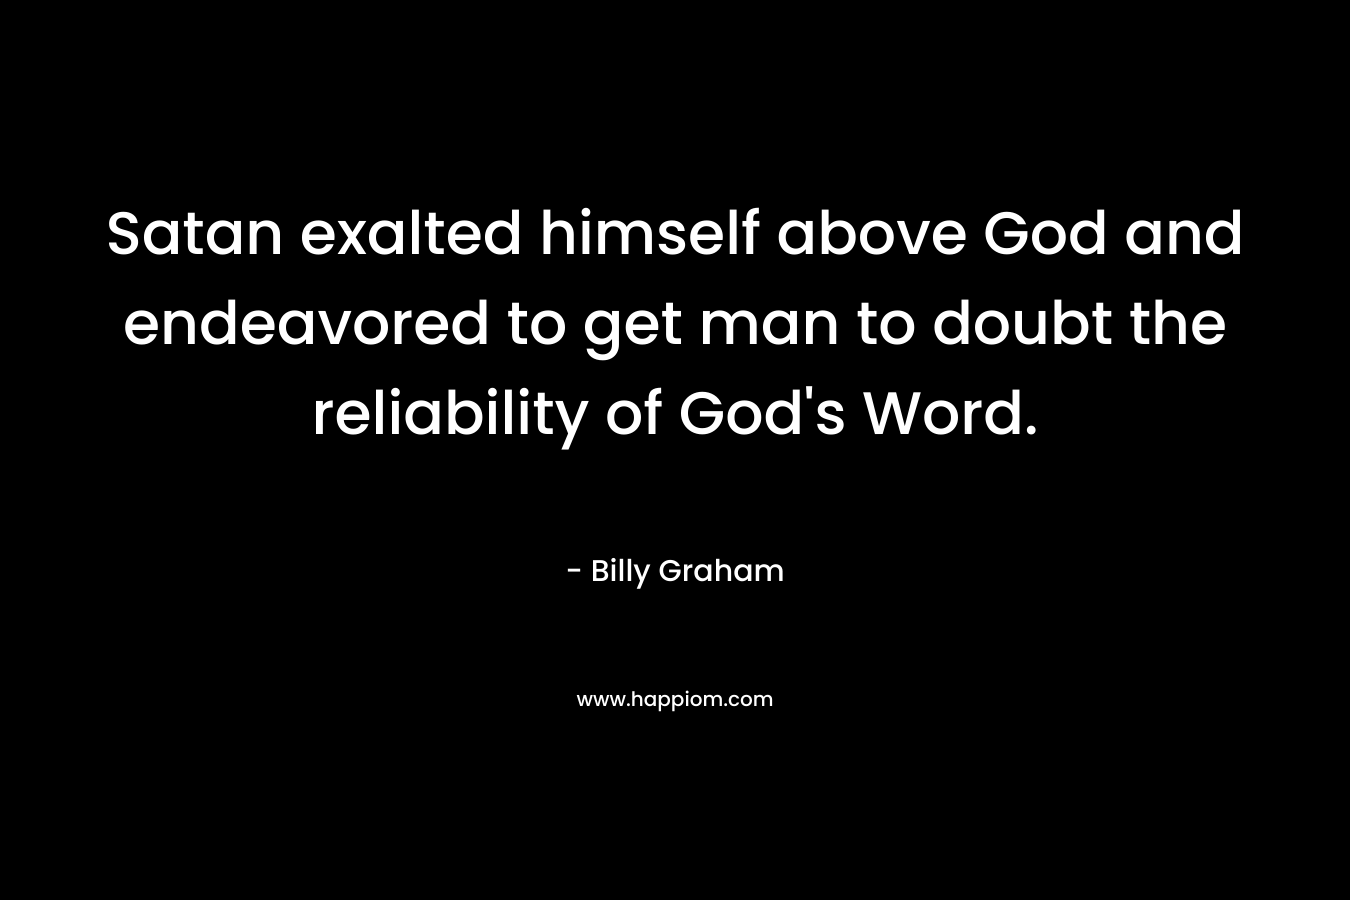 Satan exalted himself above God and endeavored to get man to doubt the reliability of God’s Word. – Billy Graham